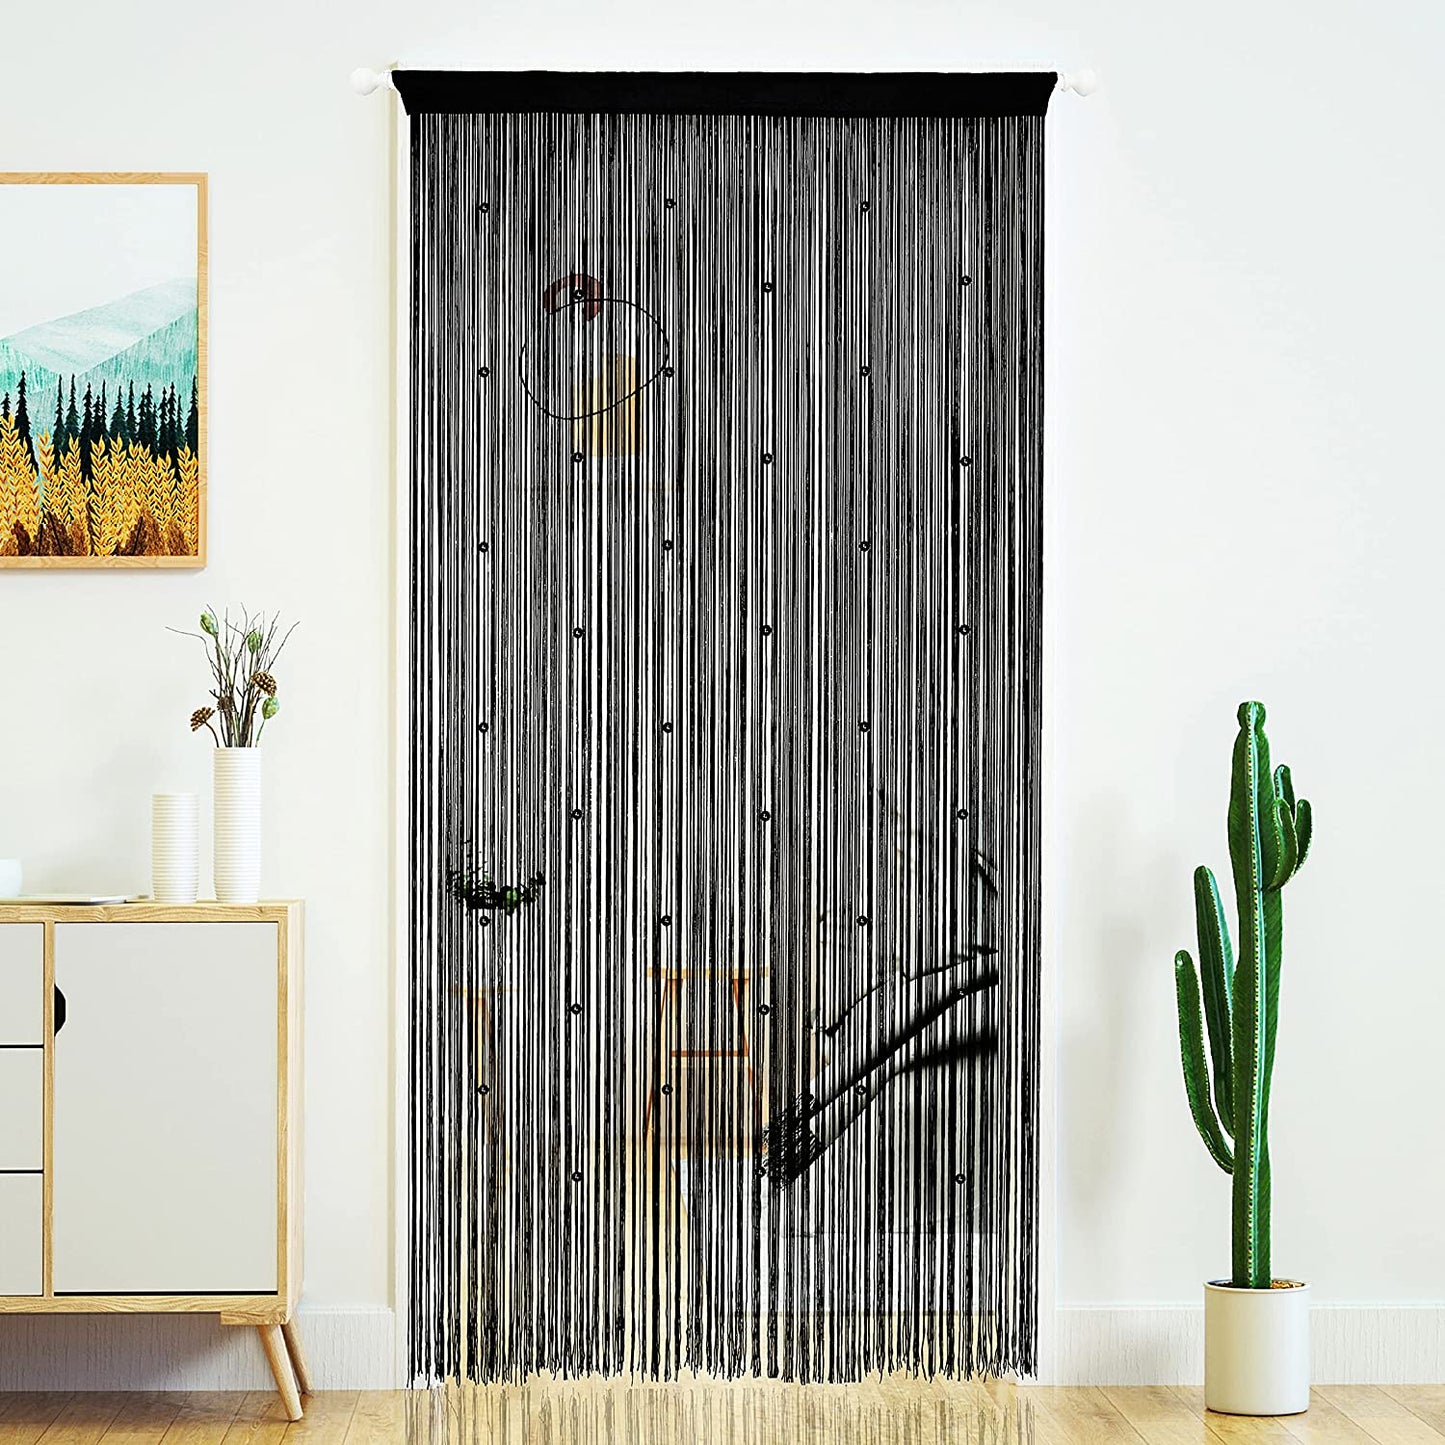 Yaoyue Beaded Curtain Door String Curtains for Doorway Tassels Beads Hanging Fringe Hippie Room Divider Window Hallway Entrance Wall Closet Bedroom Privacy Decor (39×79In/100×200Cm, Light Coffee)  YaoYue Black 100×200Cm 